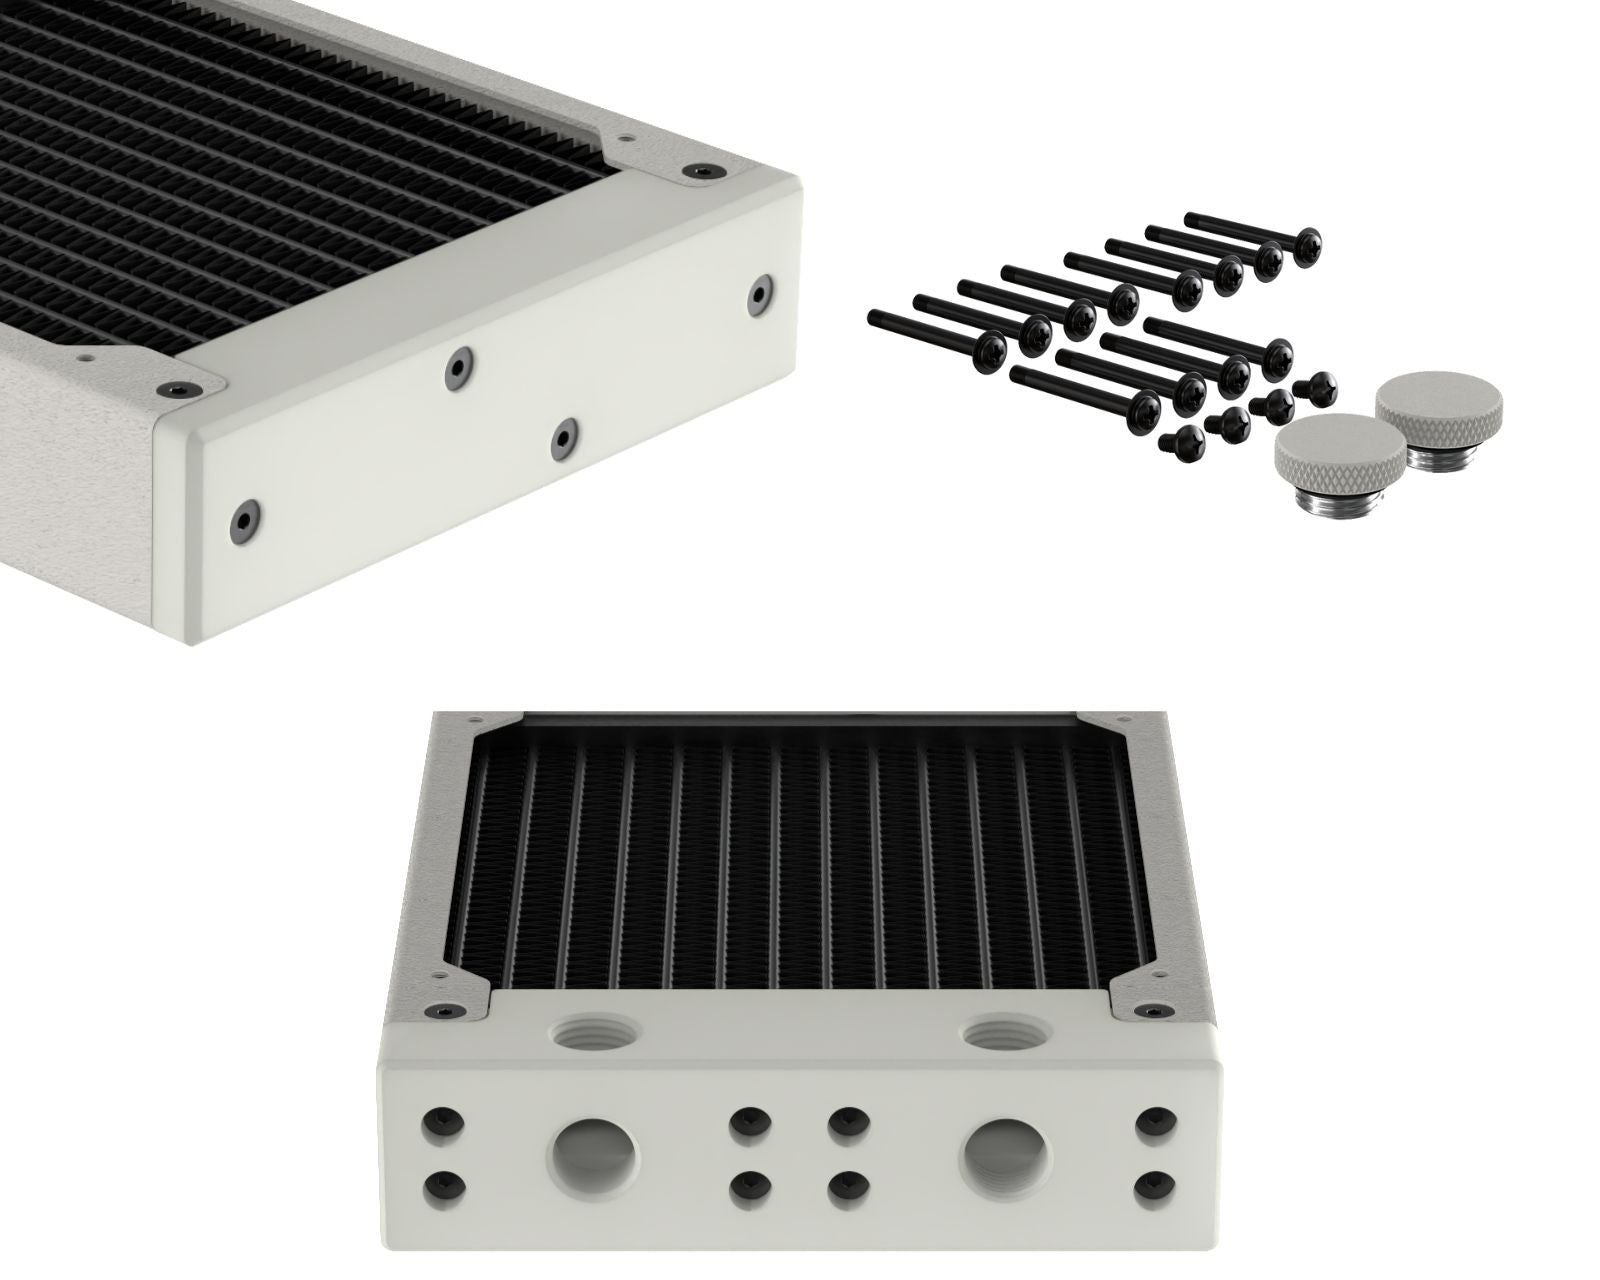 PrimoChill 360SL (30mm) EXIMO Modular Radiator, White POM, 3x120mm, Triple Fan (R-SL-W36) Available in 20+ Colors, Assembled in USA and Custom Watercooling Loop Ready - TX Matte Silver